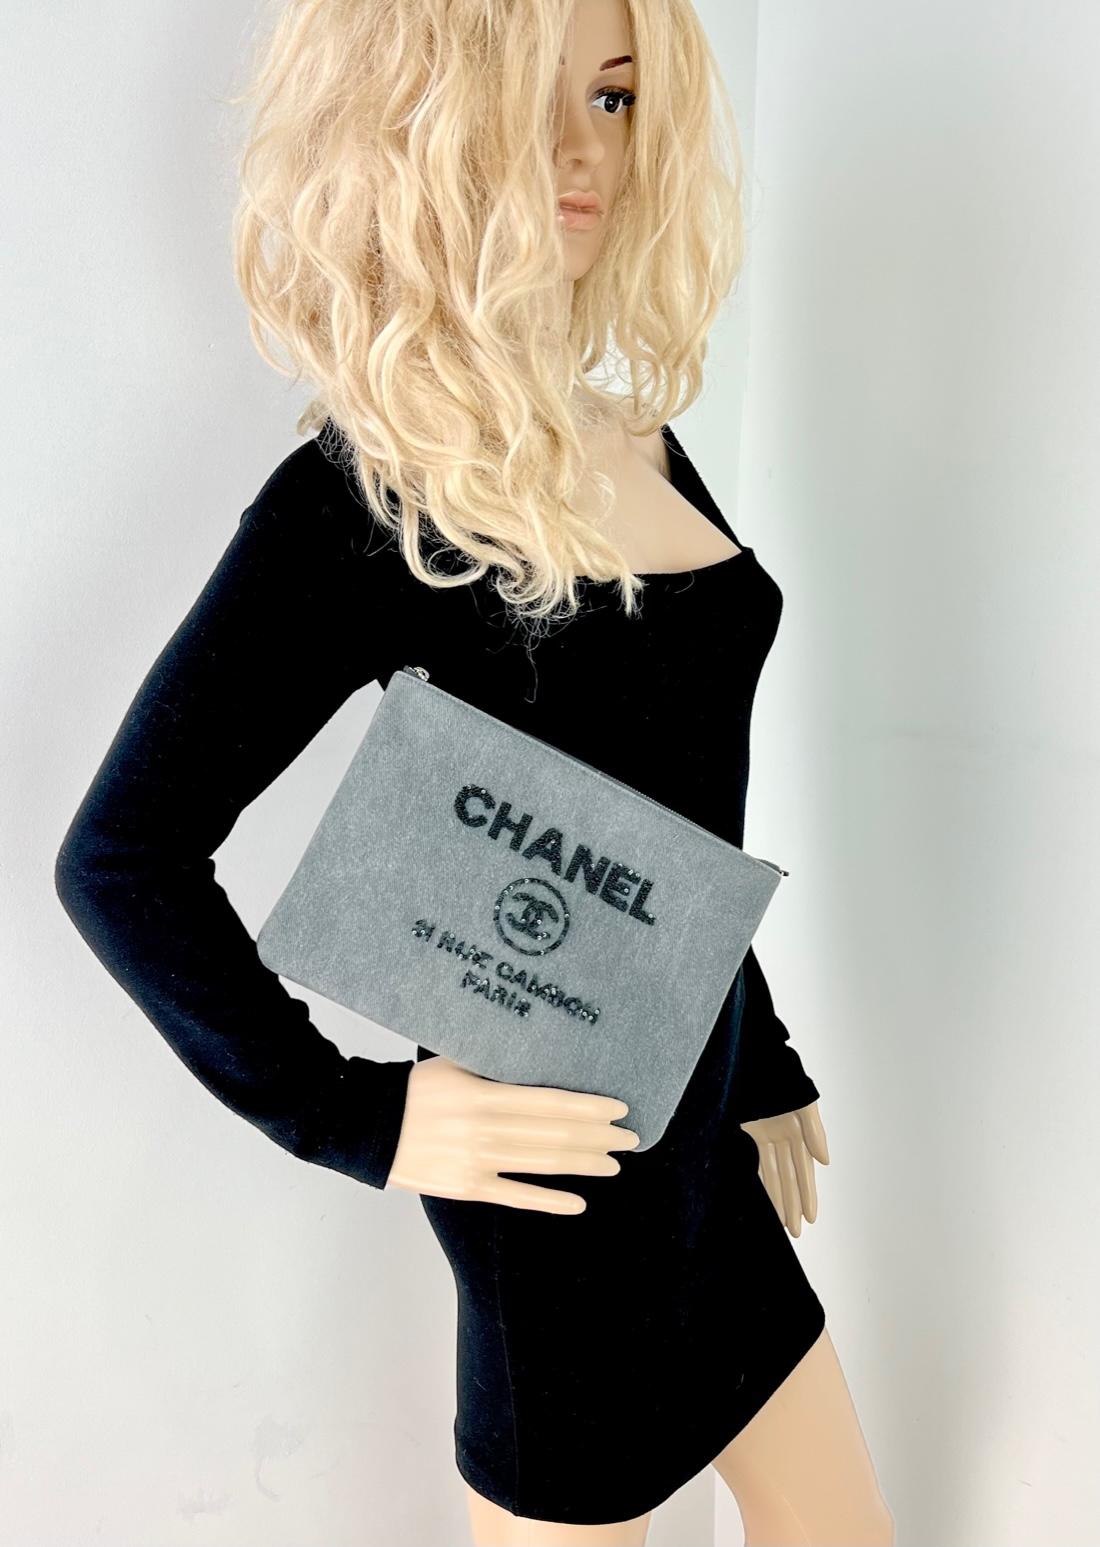 Chanel Deauville Denim Sequin Clutch Shoulder Bag In Excellent Condition For Sale In Freehold, NJ